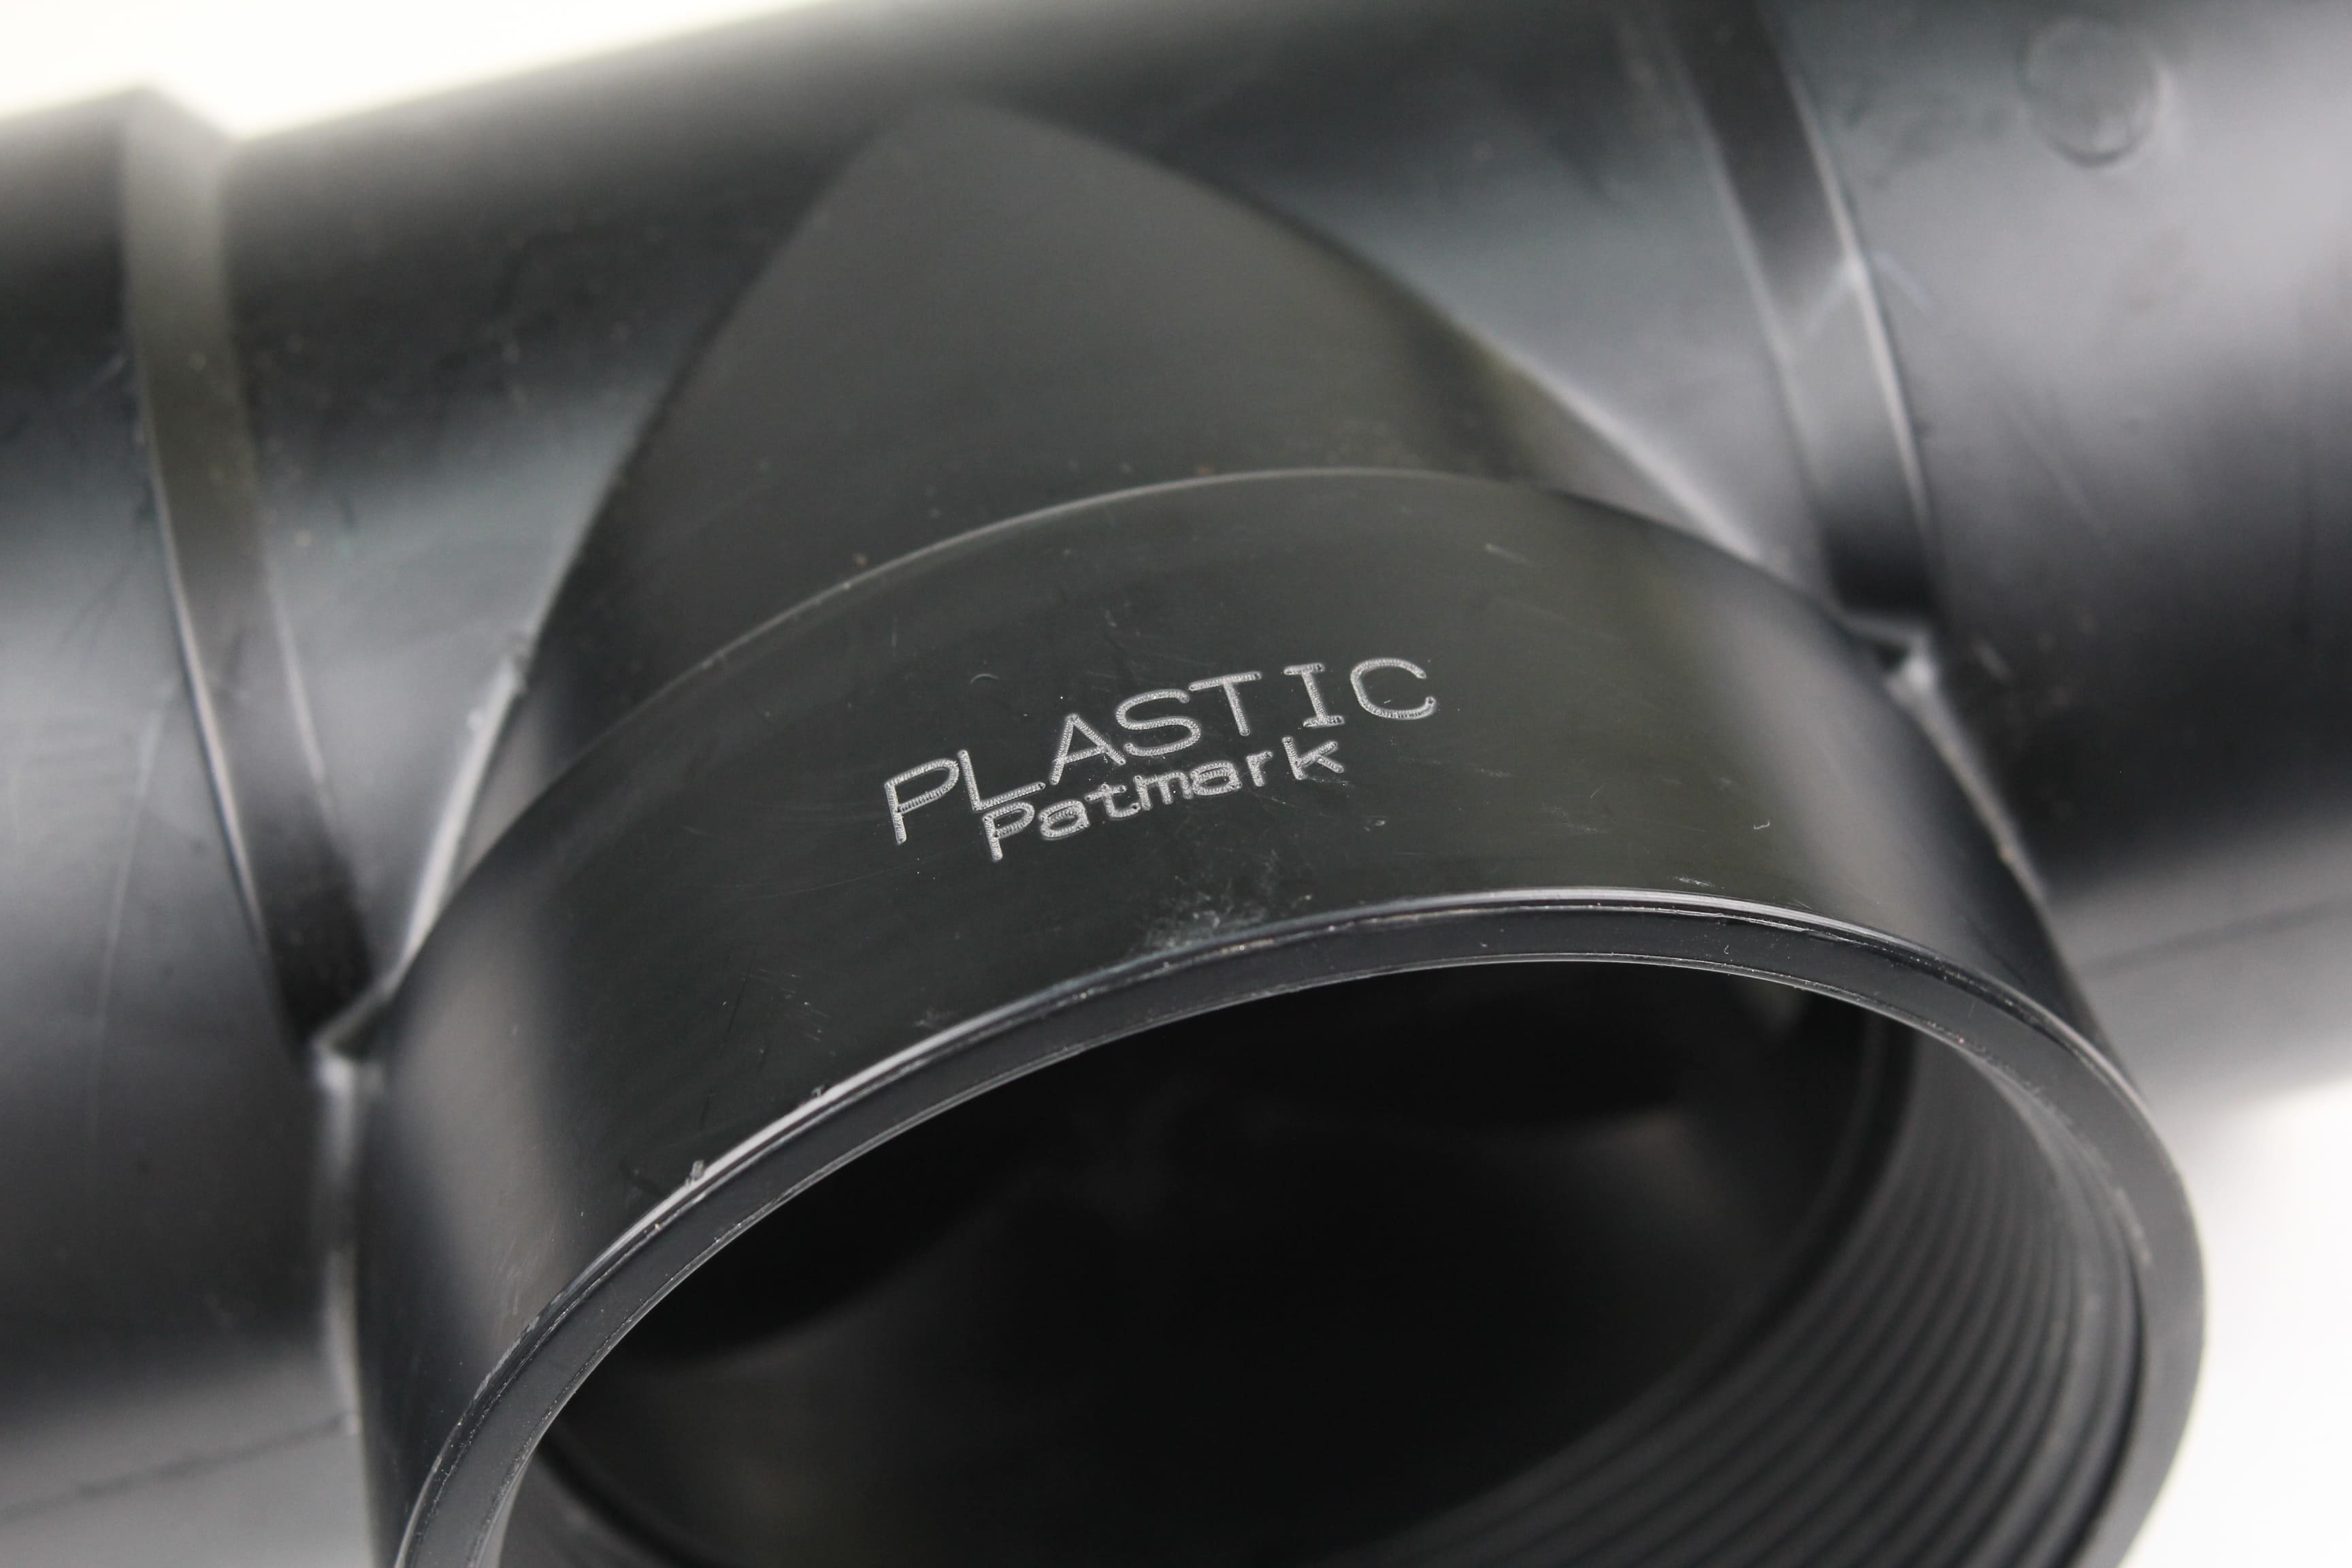 Image of plastic material engraved with the text 'PLASTIC Patmark'.